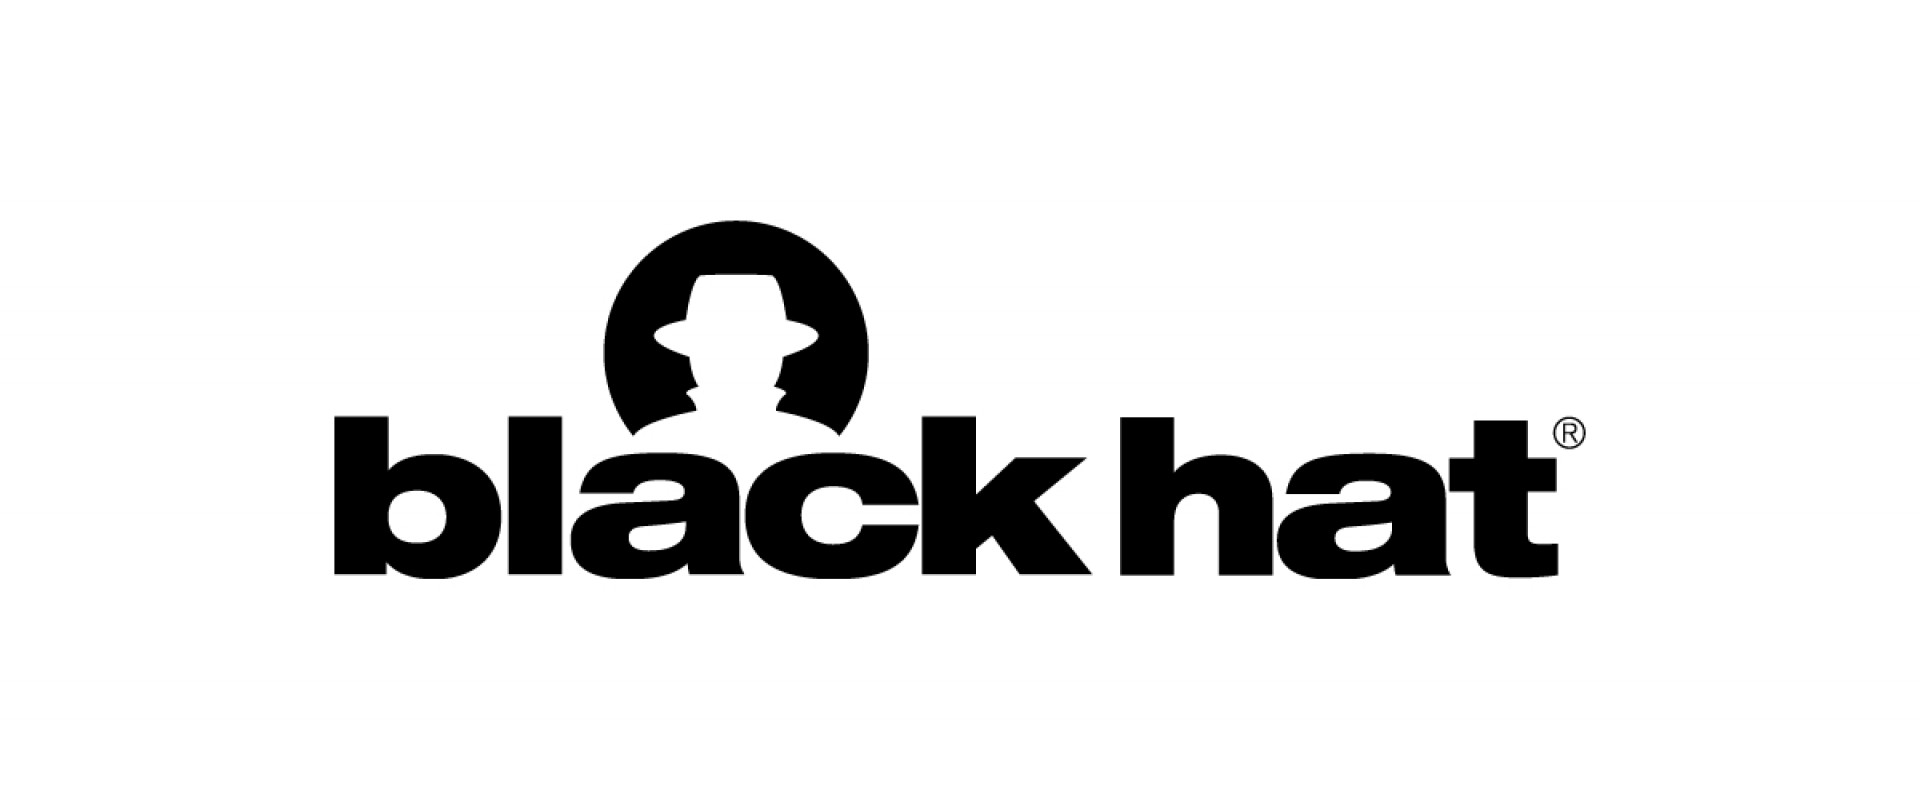 Cybersecurity Solution Highlights From Black Hat 2022